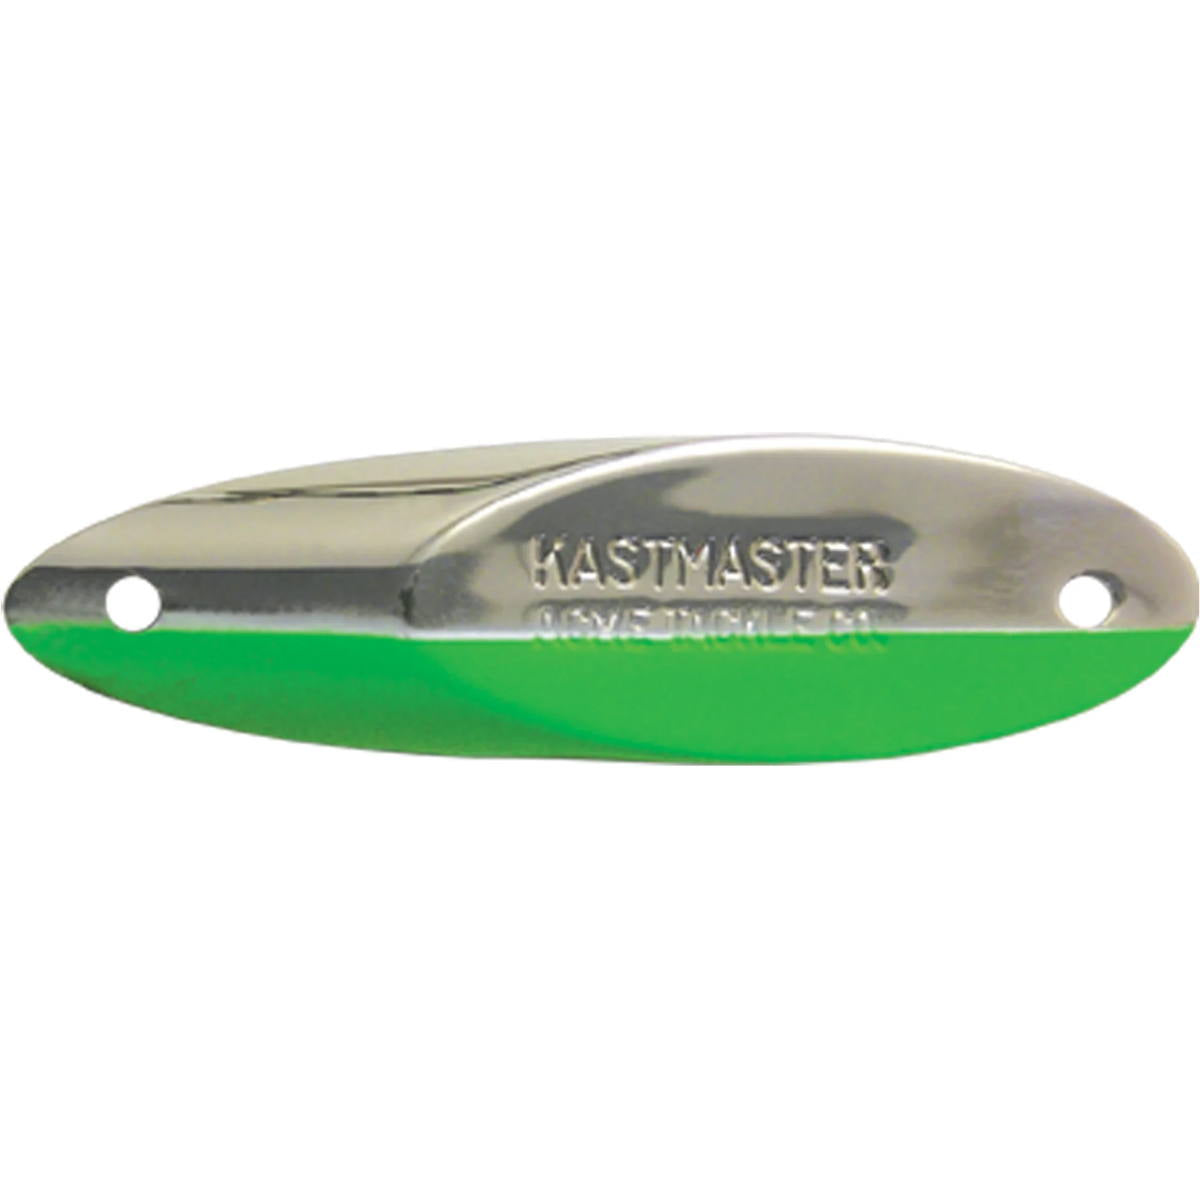 Photo of Acme Kastmaster for sale at United Tackle Shops.